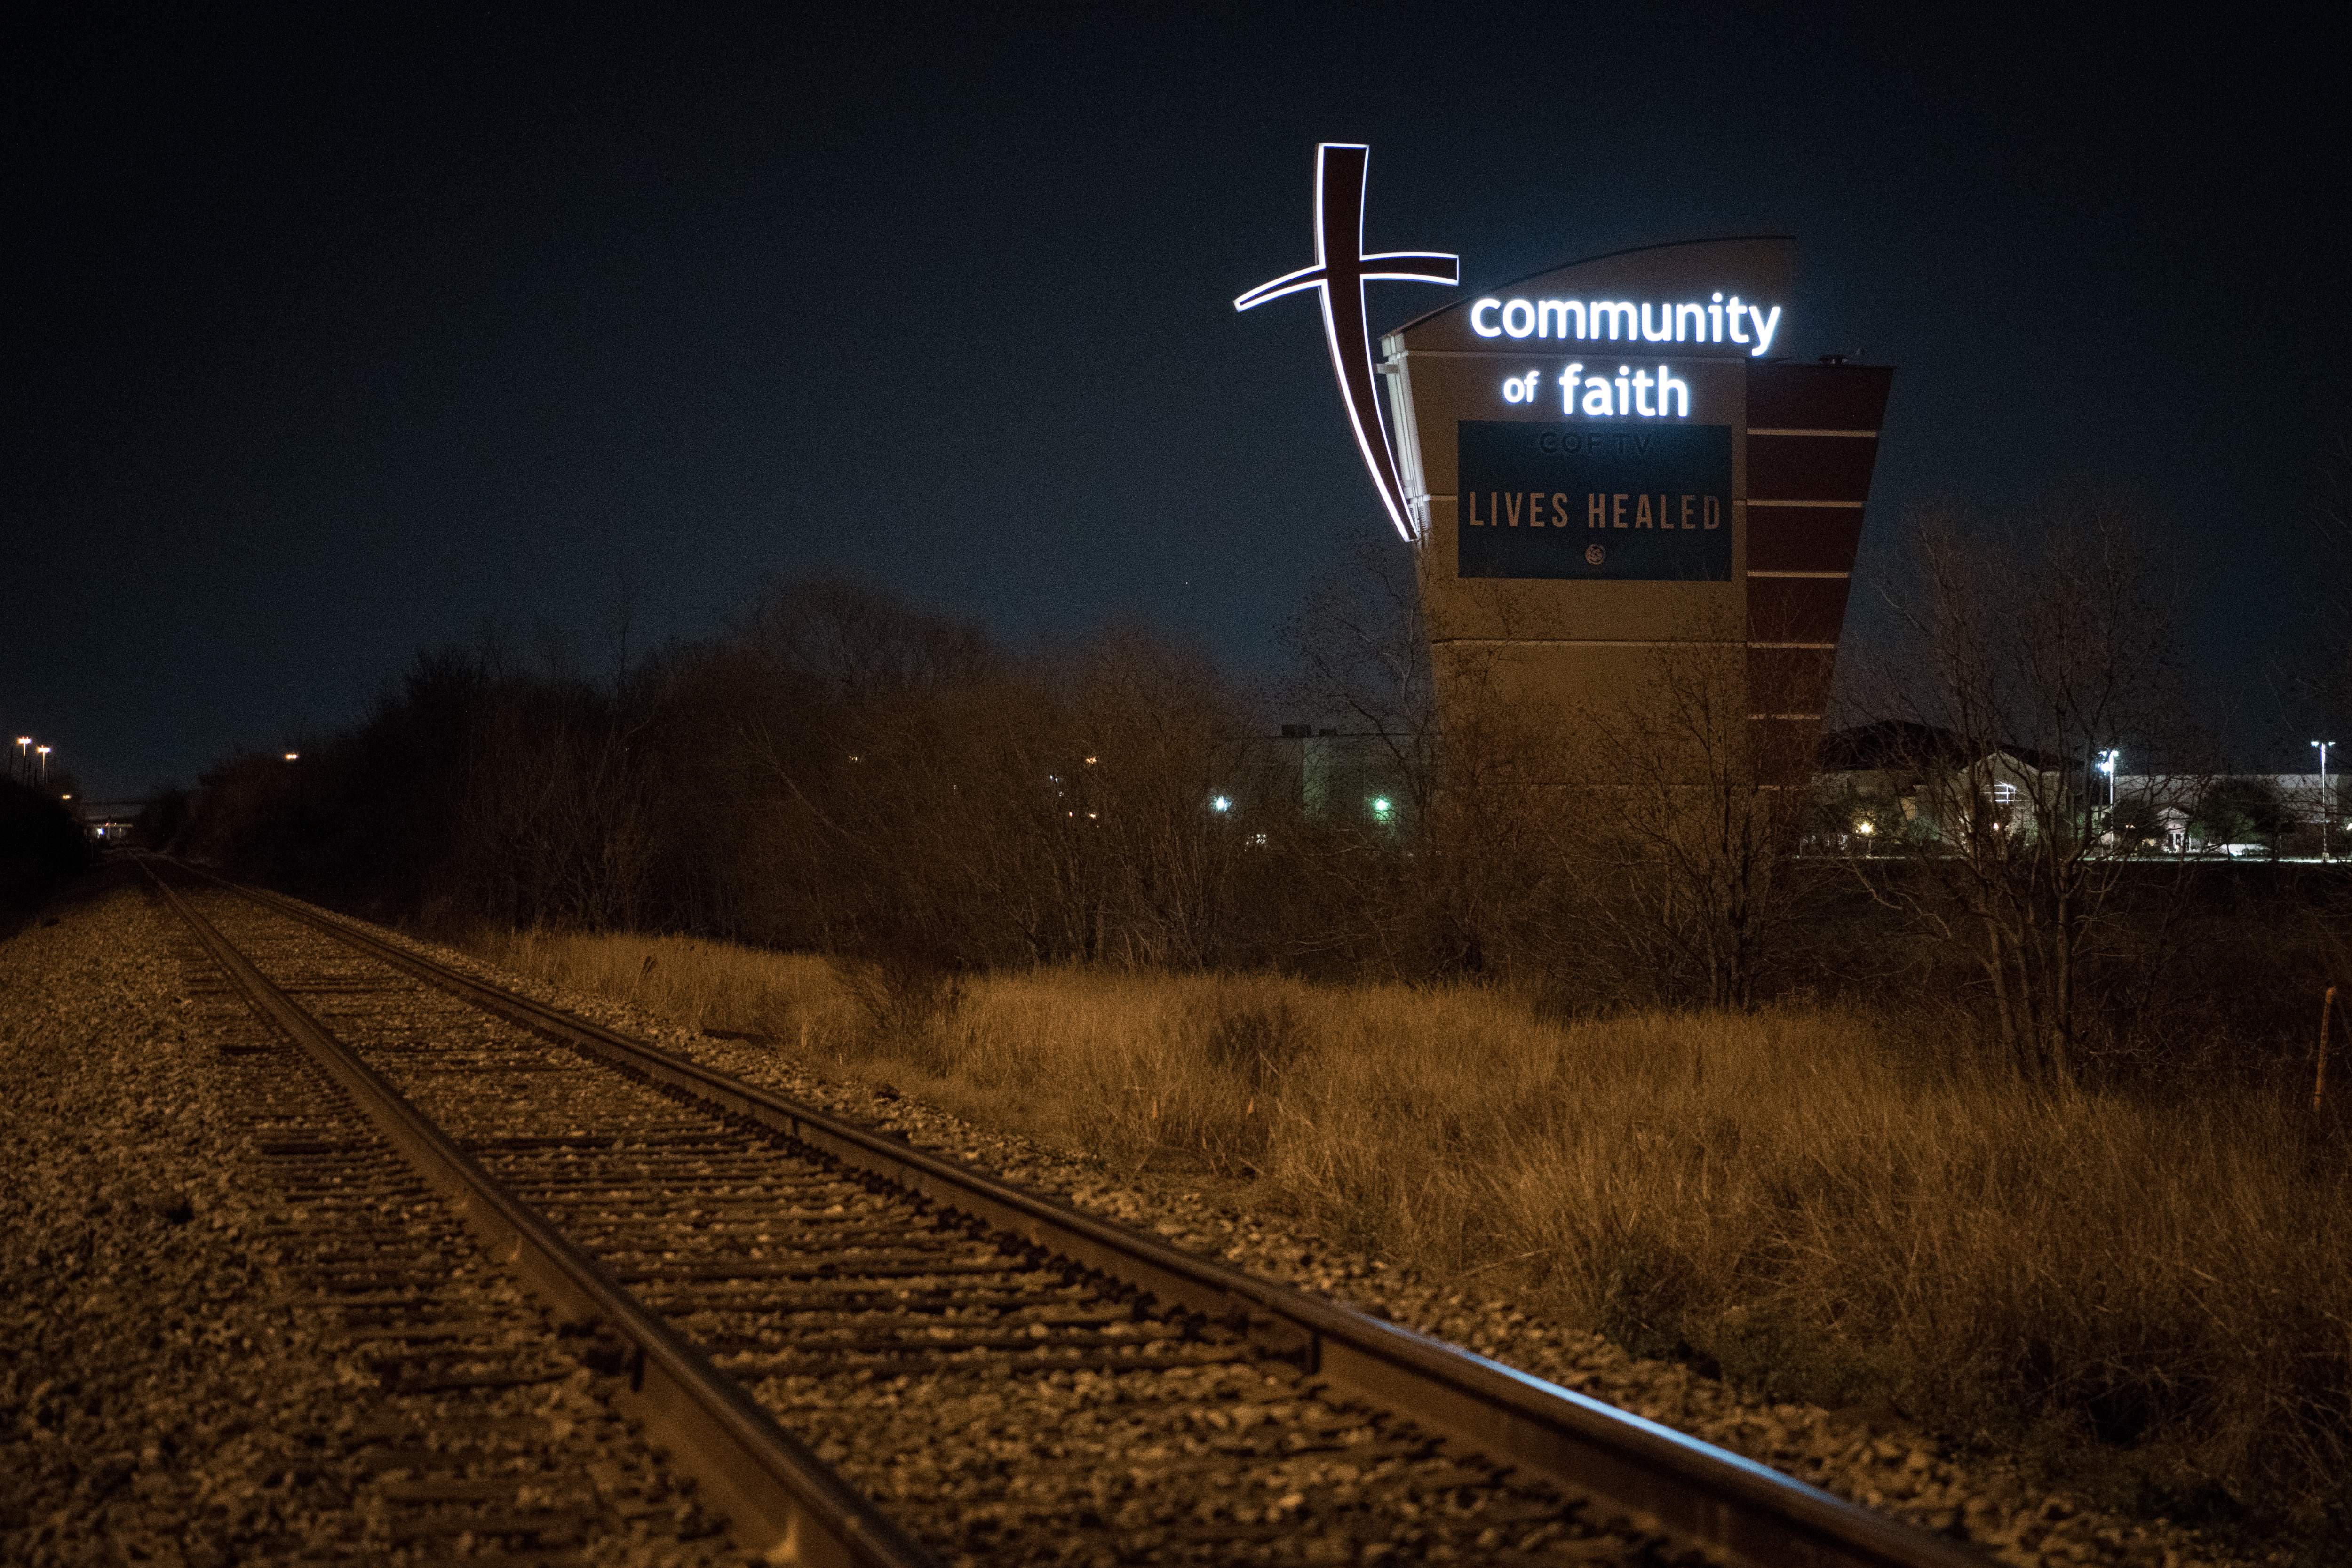 A sign at the front of the Community of Faith church is seen in Houston, Texas on February 12, 2019. - The United States' largest Protestant denomination, the Southern Baptist Convention, is facing a sexual abuse crisis after a bombshell report revealed hundreds of predators and more than 700 victims since 1998. LOREN ELLIOTT/AFP/Getty Images